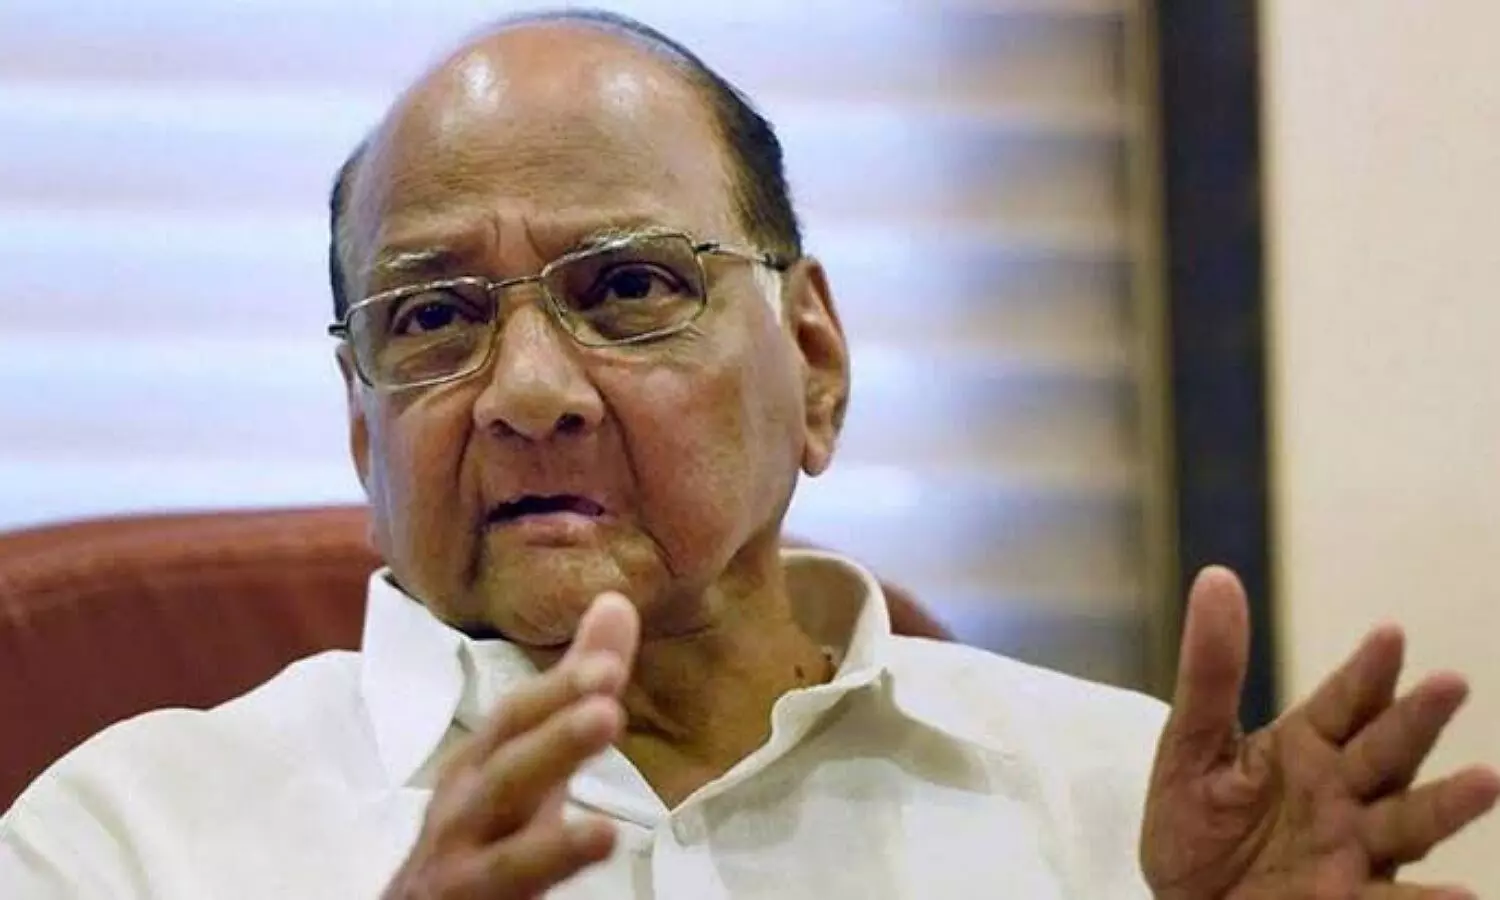 sharad pawar condemns police action spoke on sedition case filed against party workers